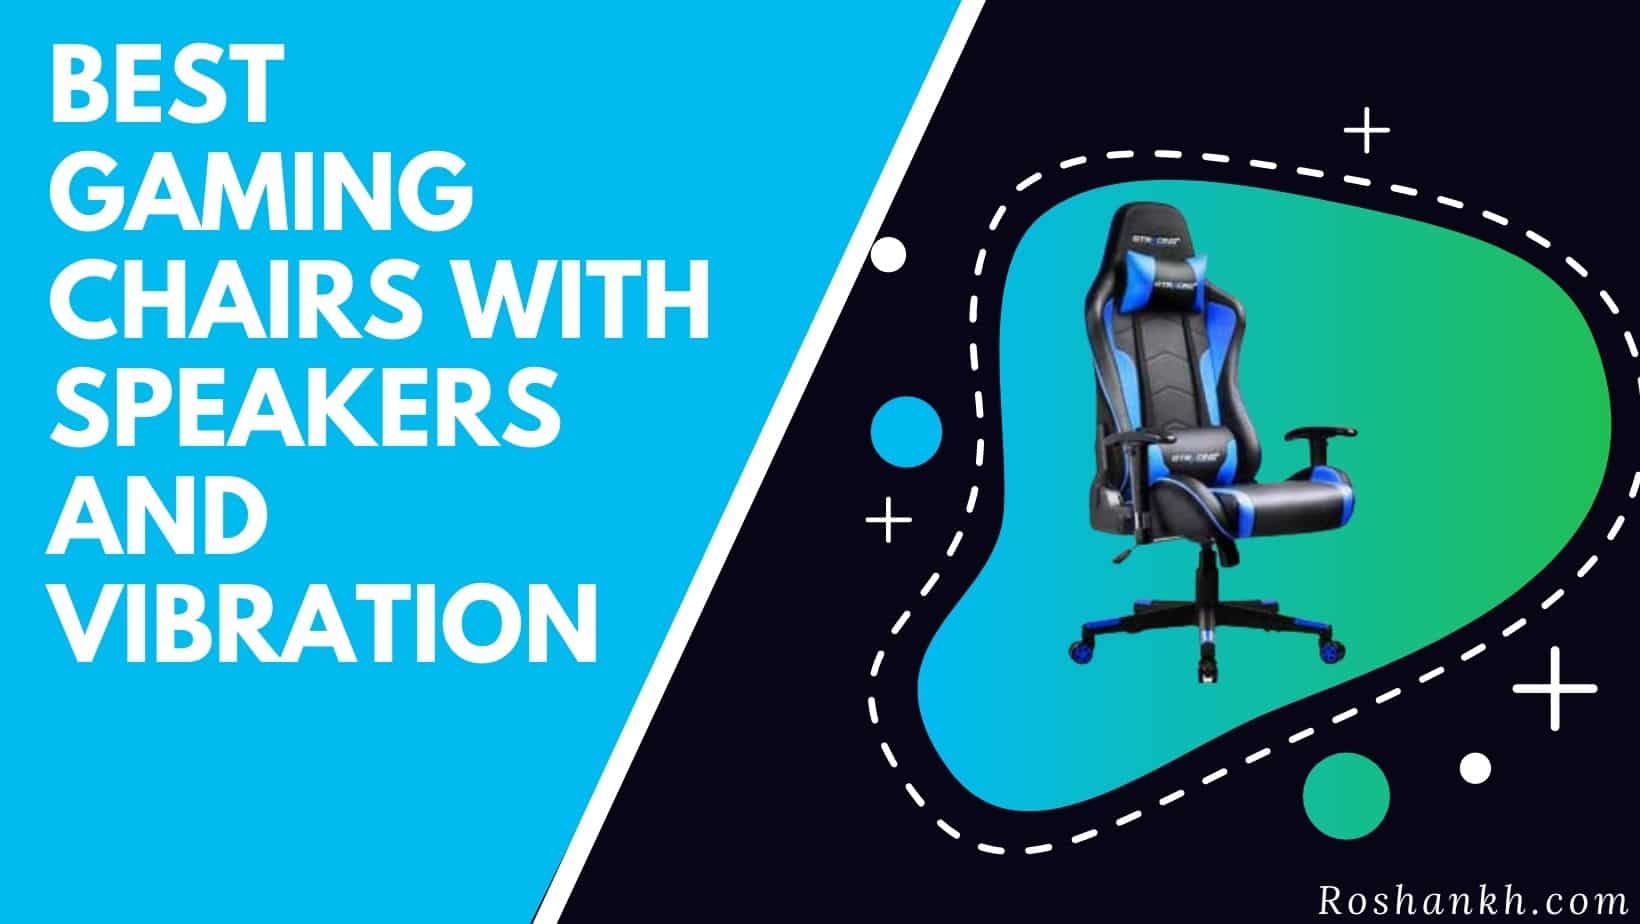 Best Gaming Chairs with Speakers and Vibration